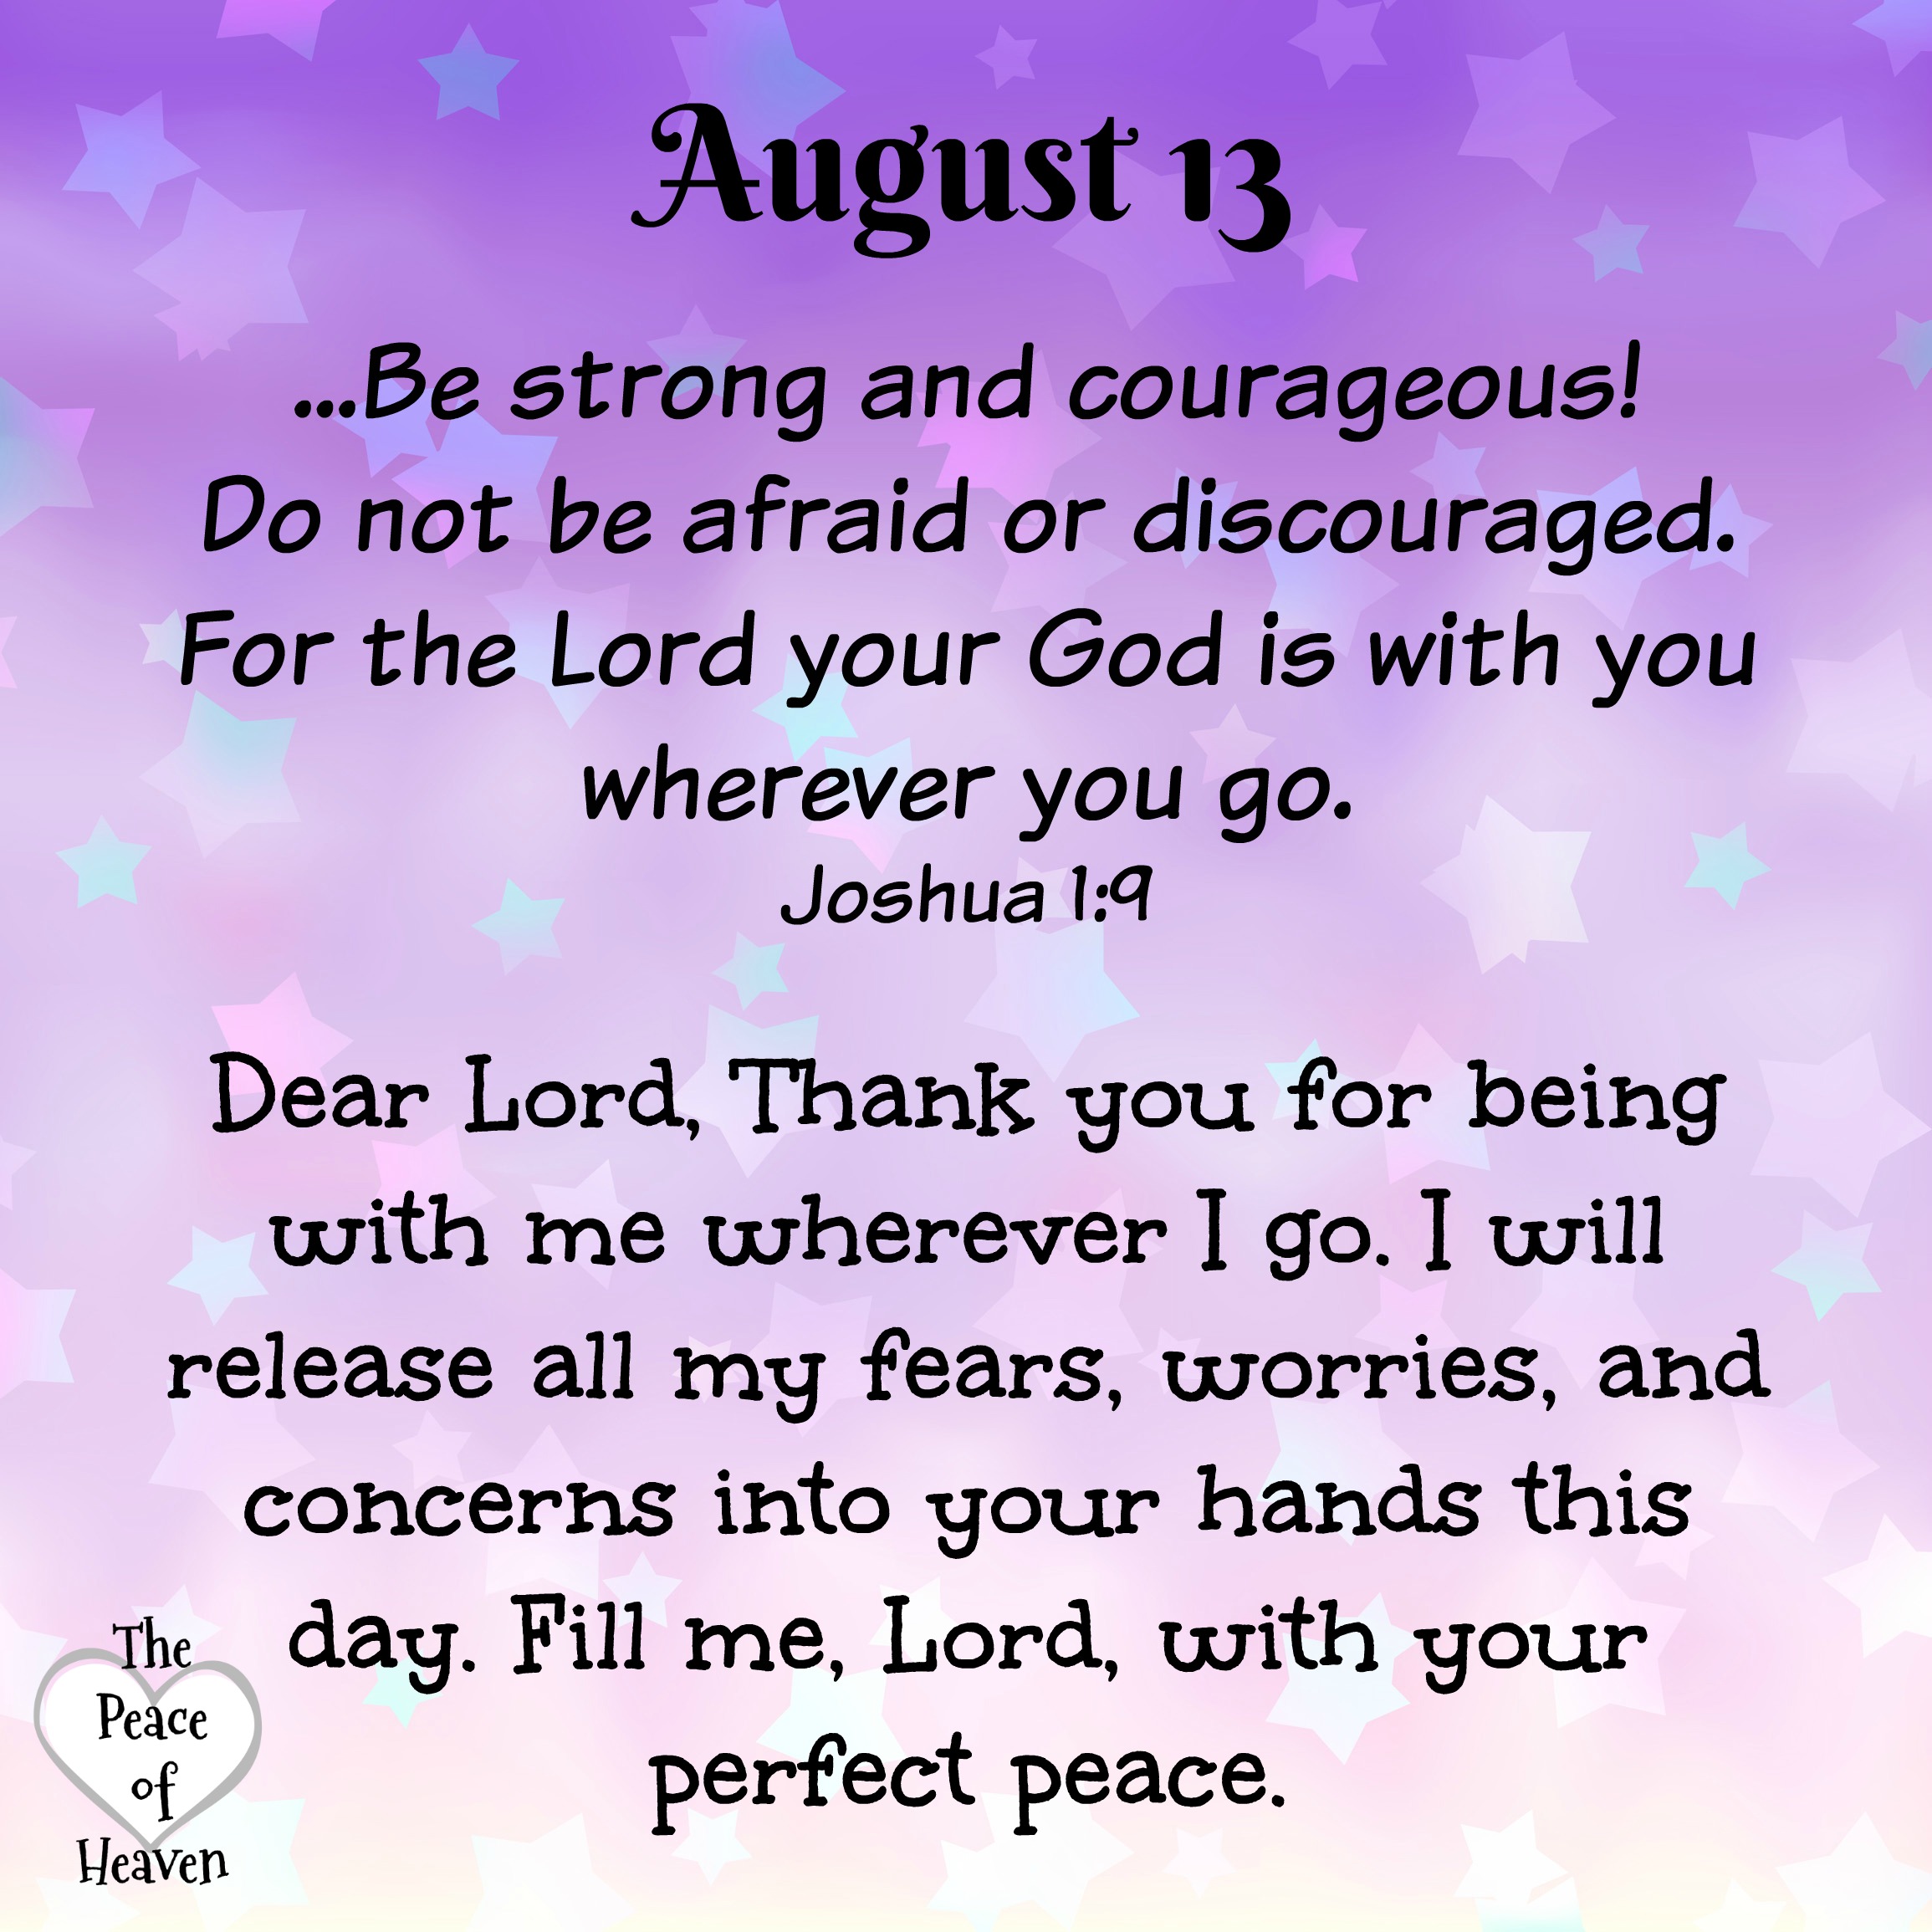 August 13 The Peace of Heaven